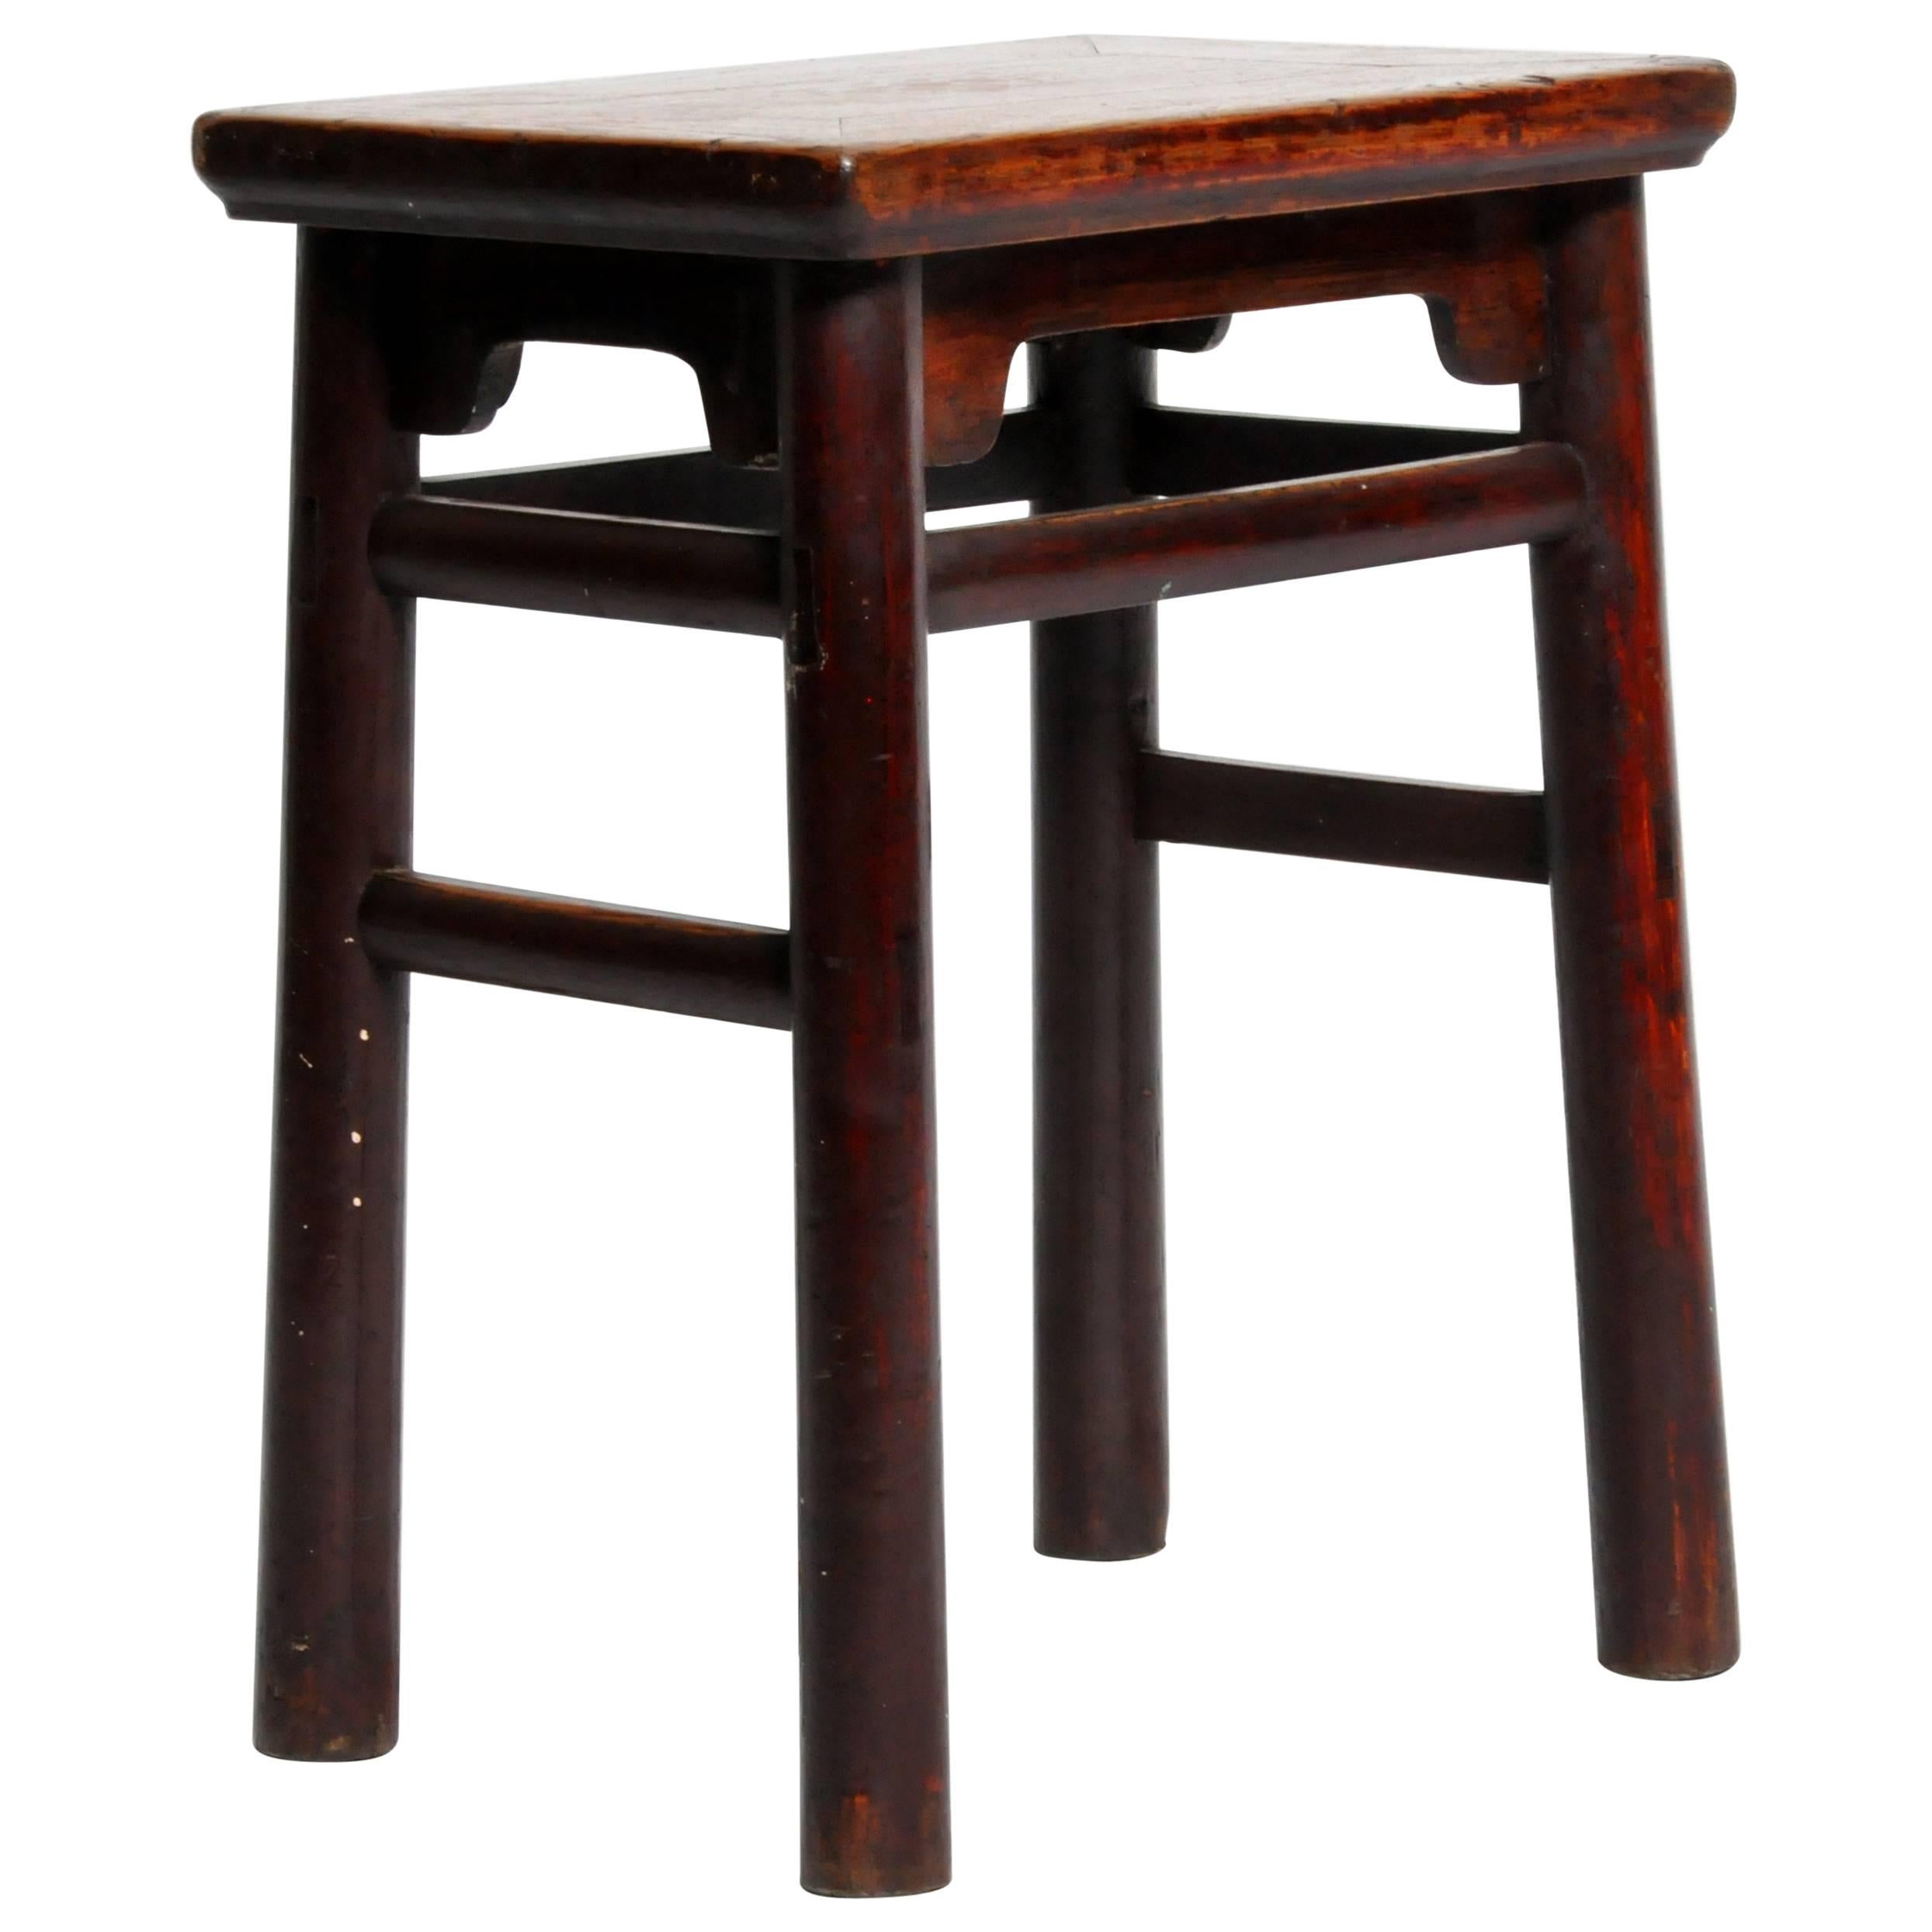 Qing Dynasty Chinese Stool with Round Legs and Original Lacquer